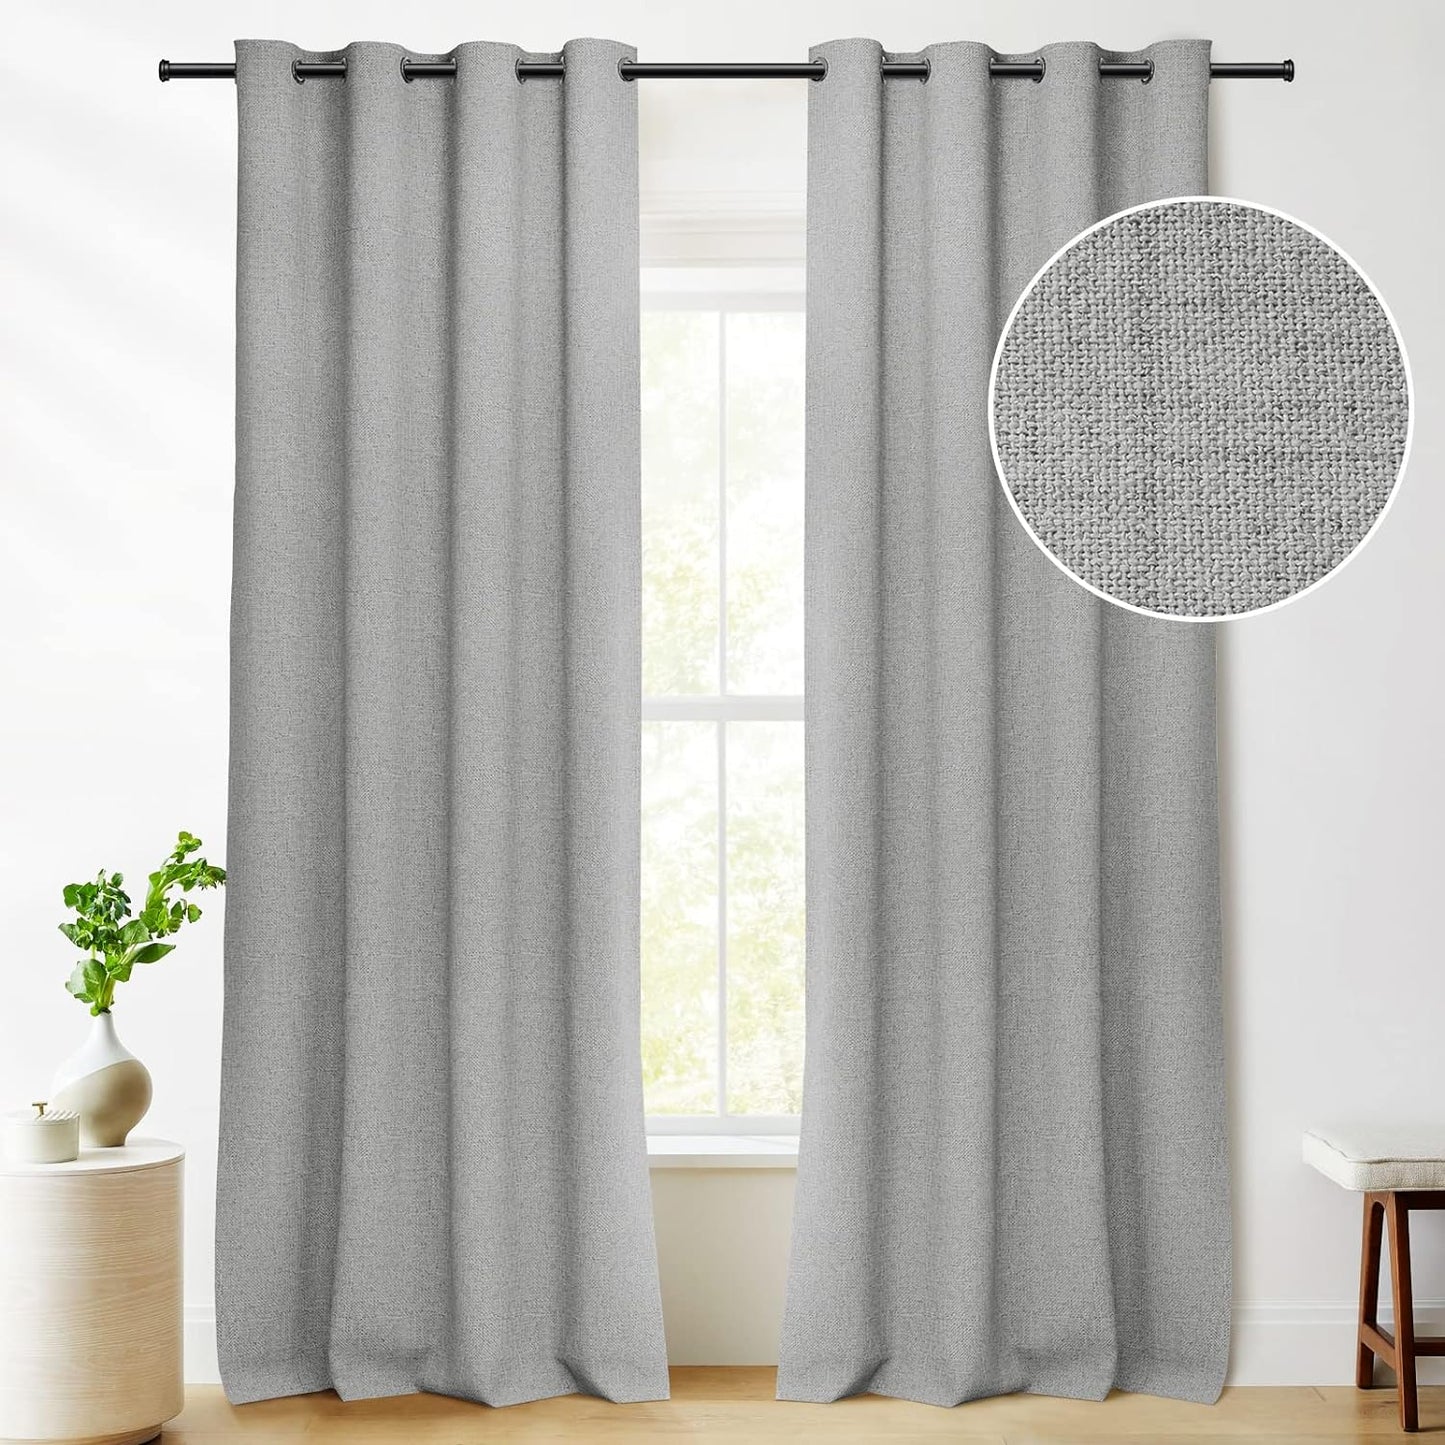 RHF Blackout Curtains 84 Inch Length 2 Panels Set, Primitive Linen Look, 100% Blackout Curtains Linen Black Out Curtains for Bedroom Windows, Burlap Grommet Curtains-(50X84, Oatmeal)  Rose Home Fashion Grey W50 X L96 